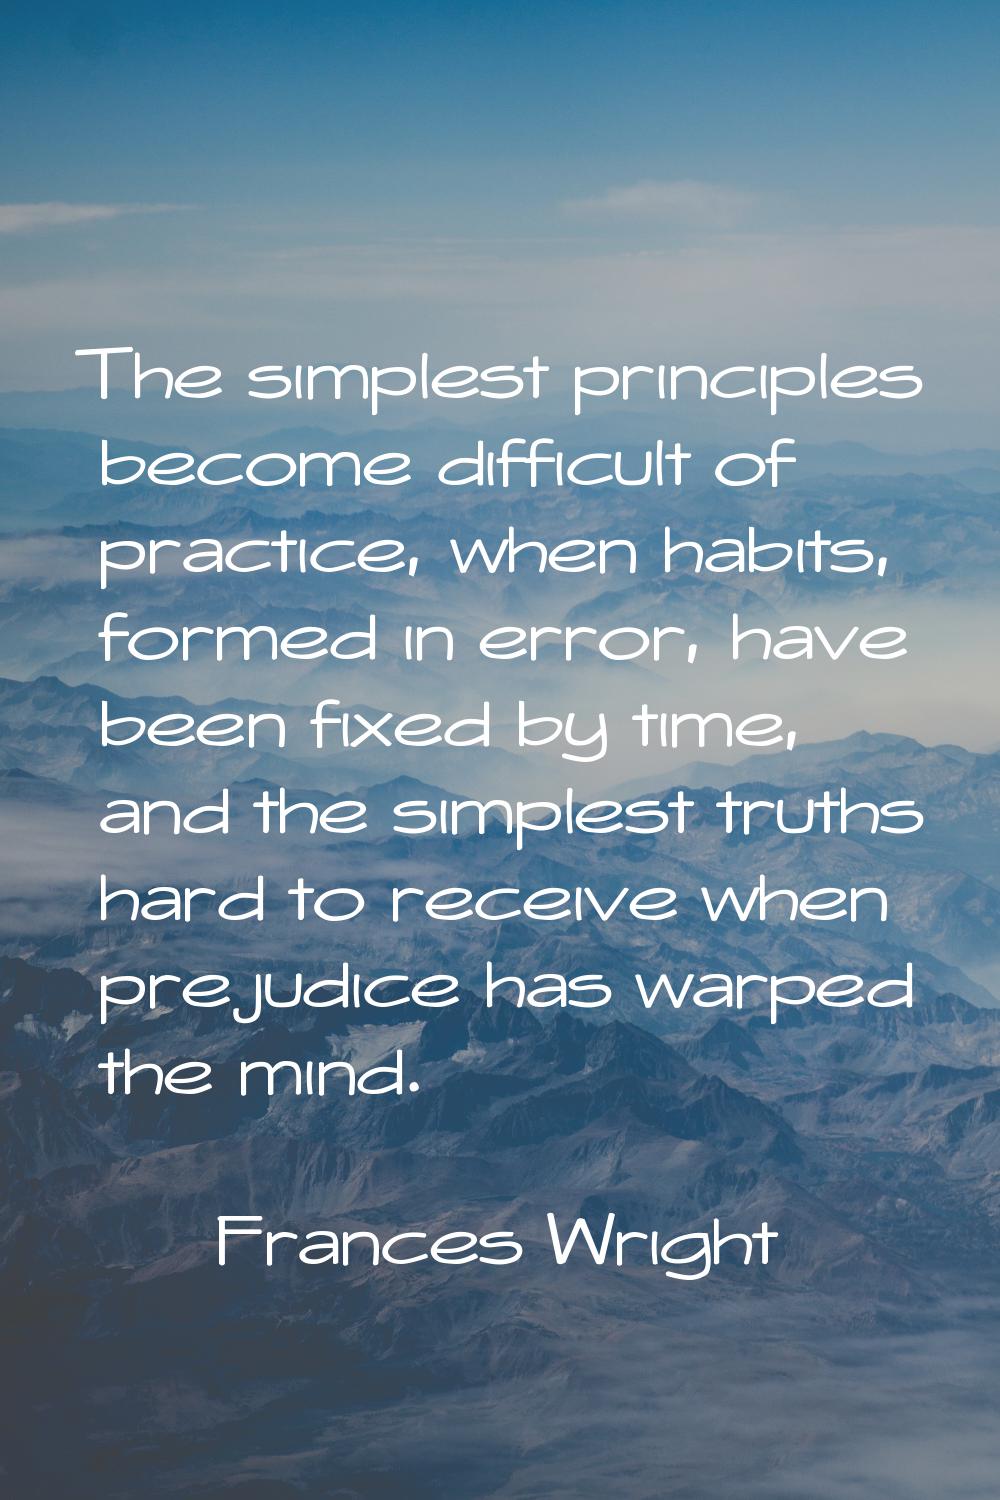 The simplest principles become difficult of practice, when habits, formed in error, have been fixed